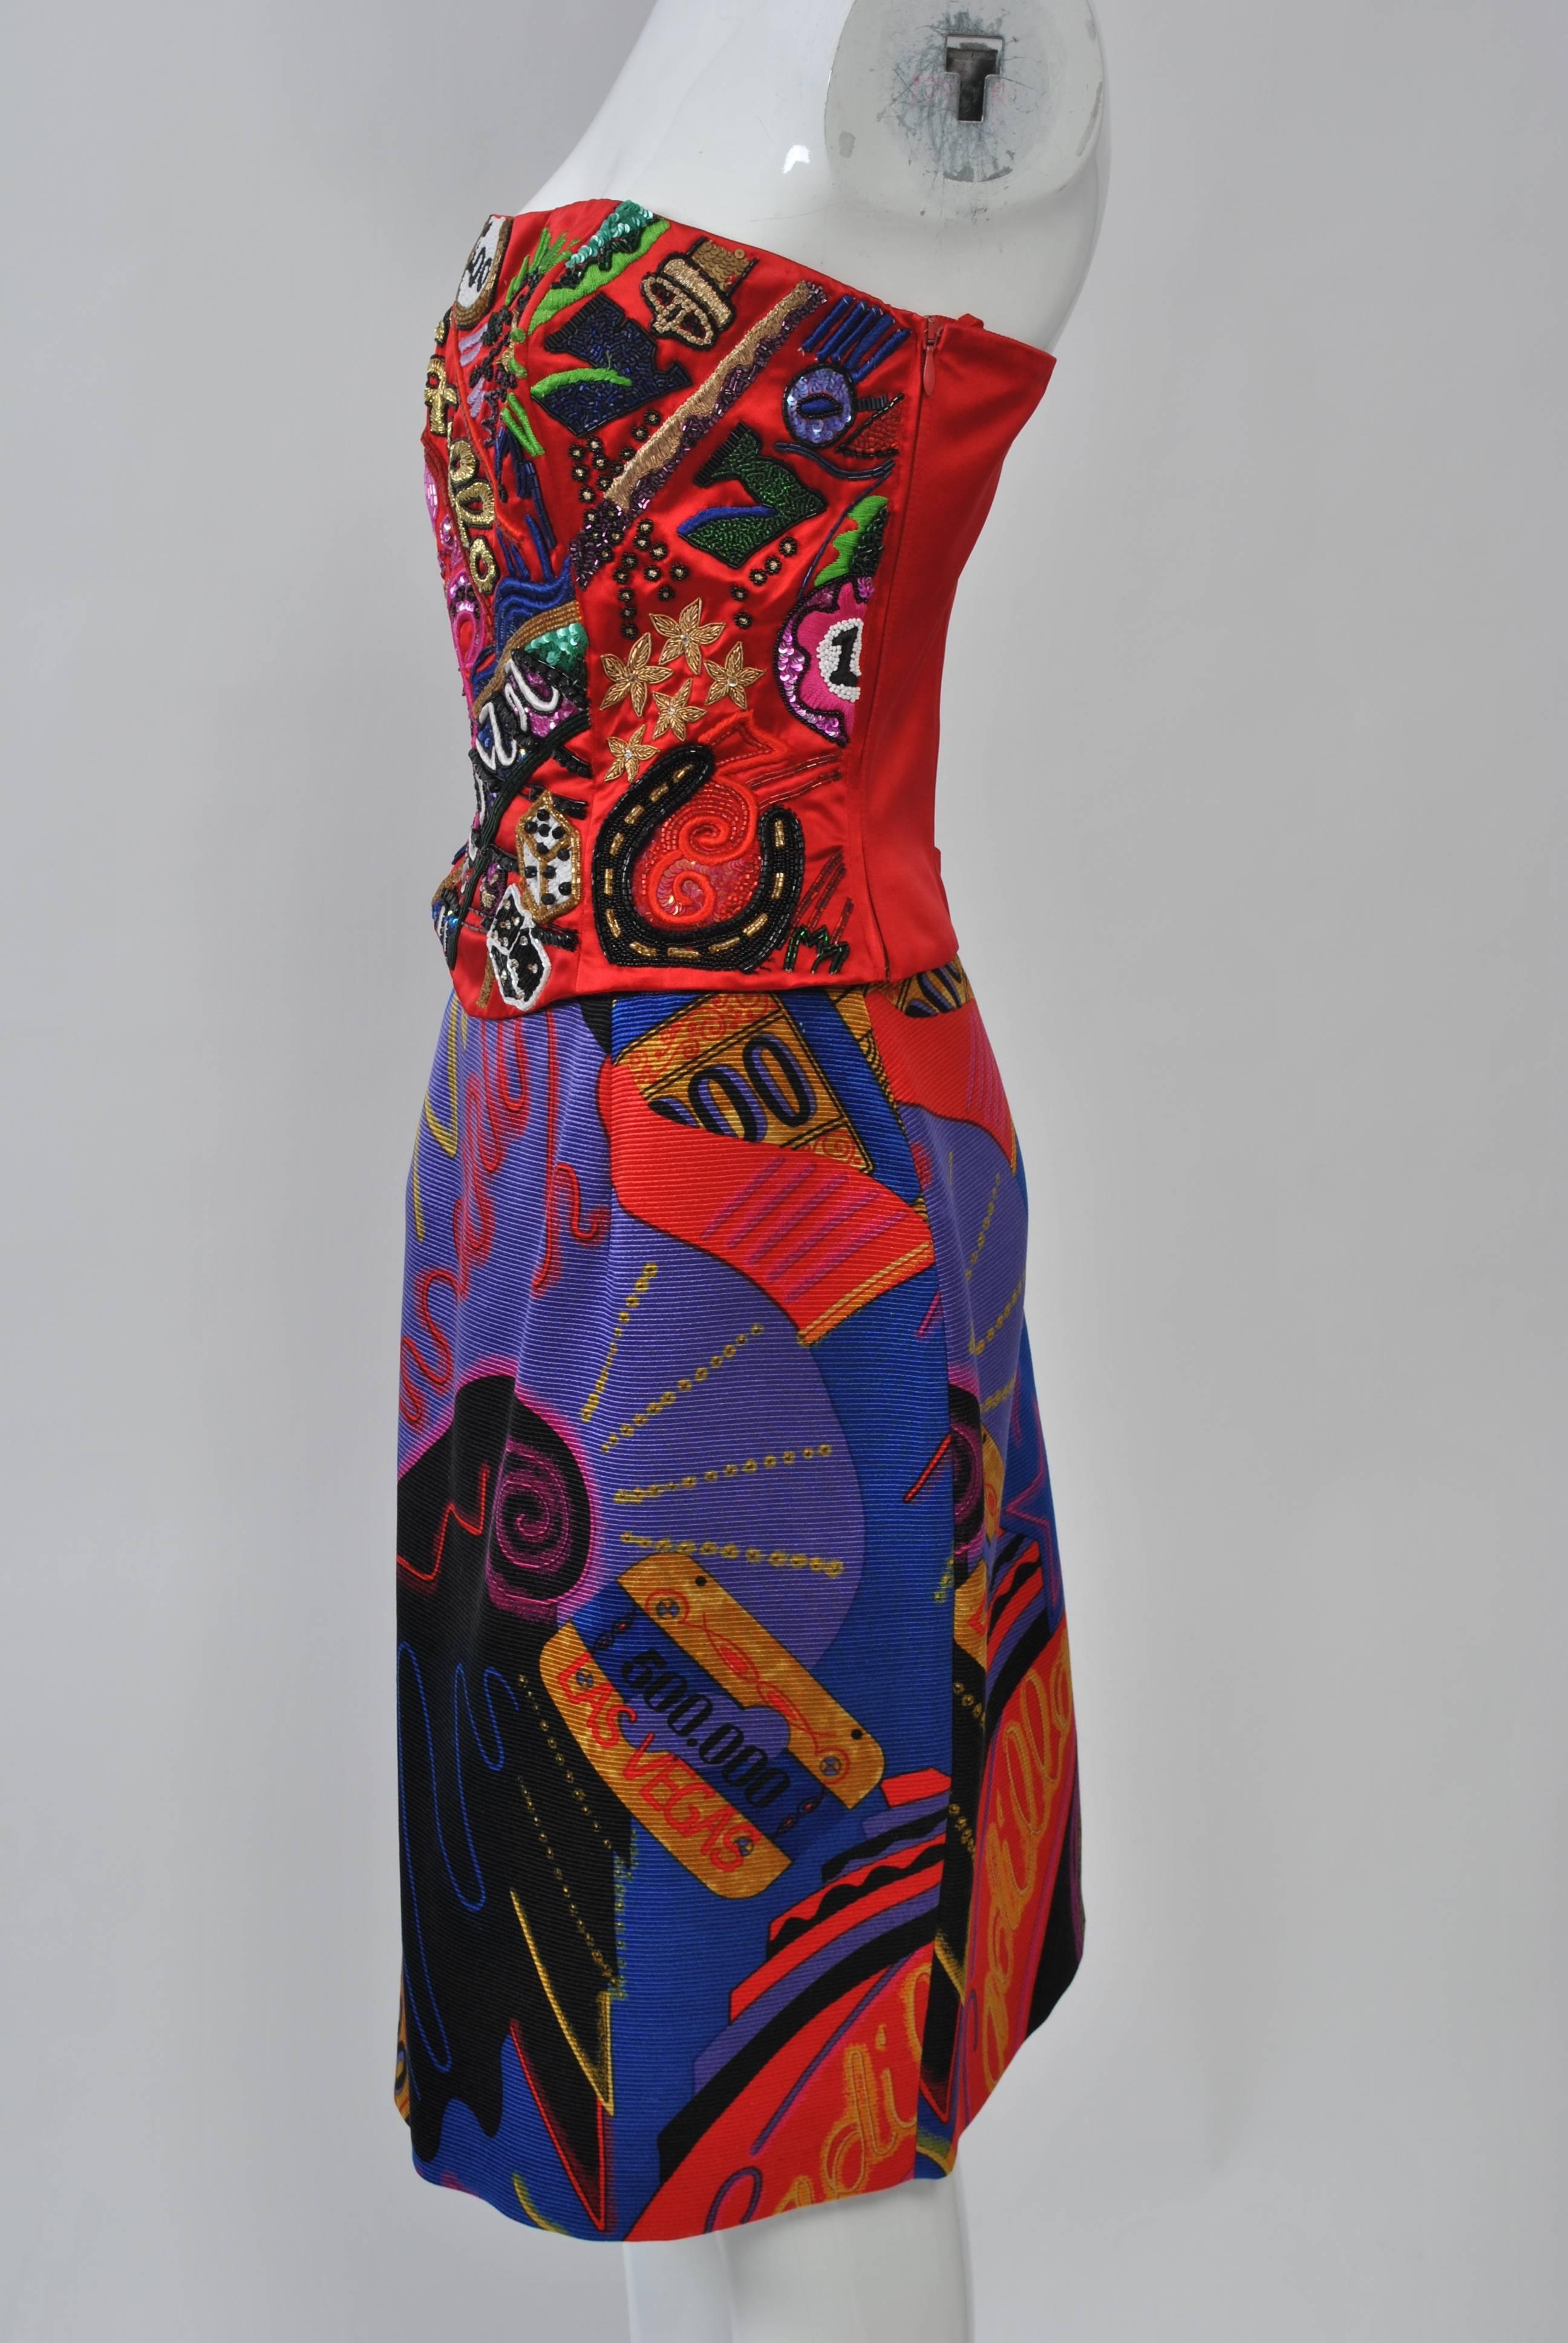 Quintessential 1980s aesthetic defines this outfit from Louis Feraud, its brightly colored print bustier dominated by gambling motifs appliquéd and embroidered on a red satin ground. Accompanied by your choice of two skirts - a coordinating print